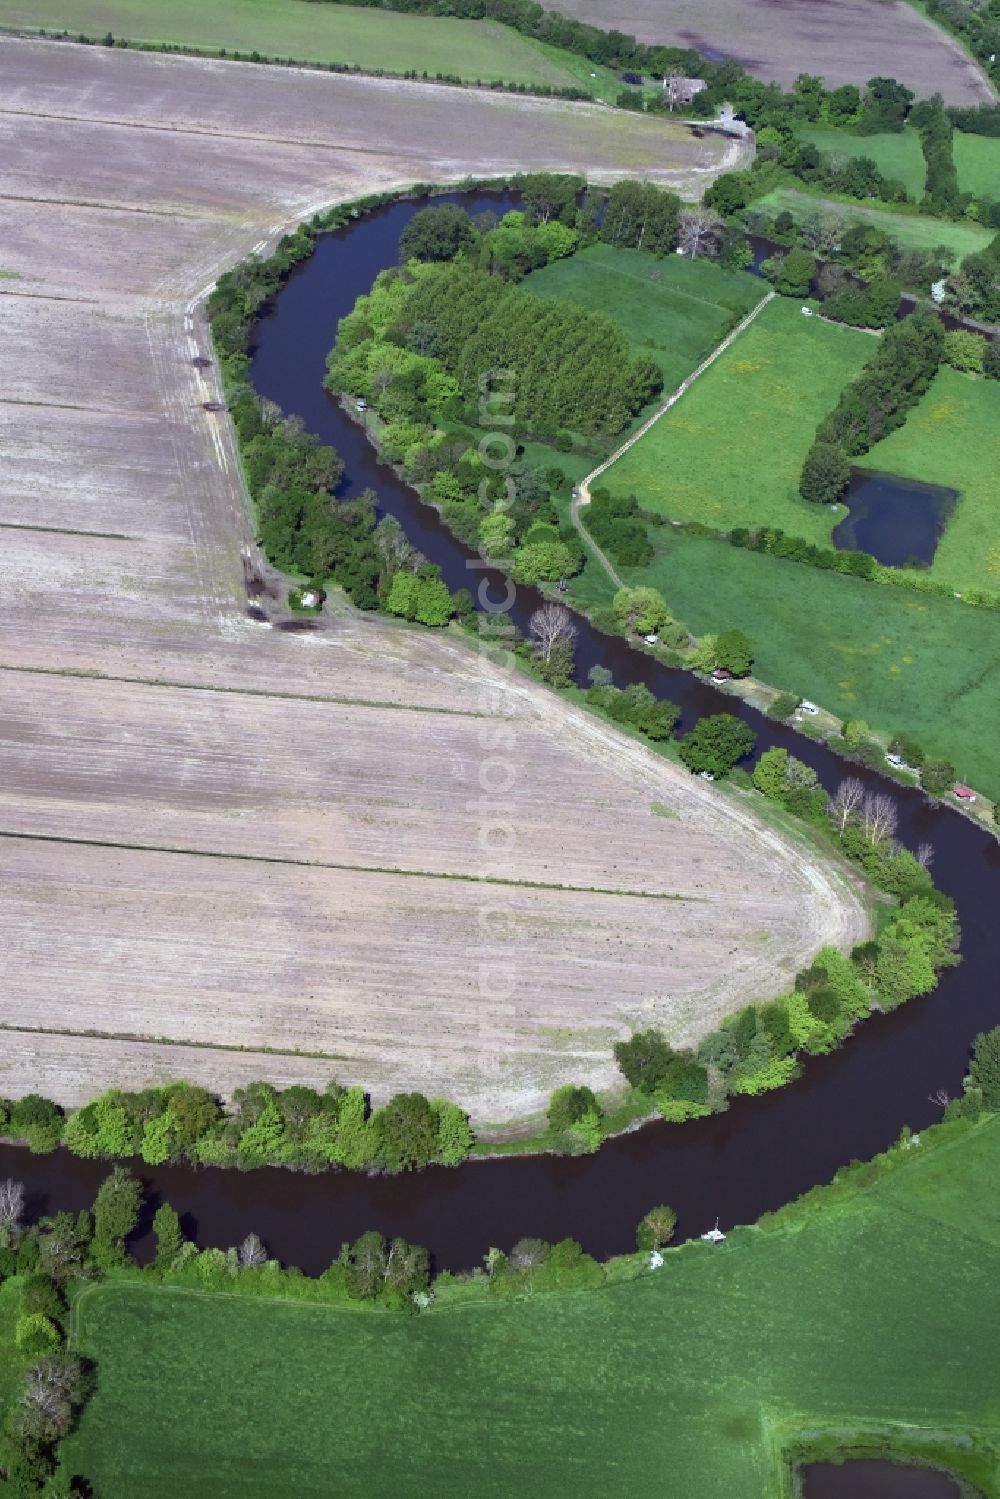 Saint-Denis-de-Pile from above - Curved loop of the riparian zones on the course of the river Isle in Saint-Denis-de-Pile in Aquitaine Limousin Poitou-Charentes, France